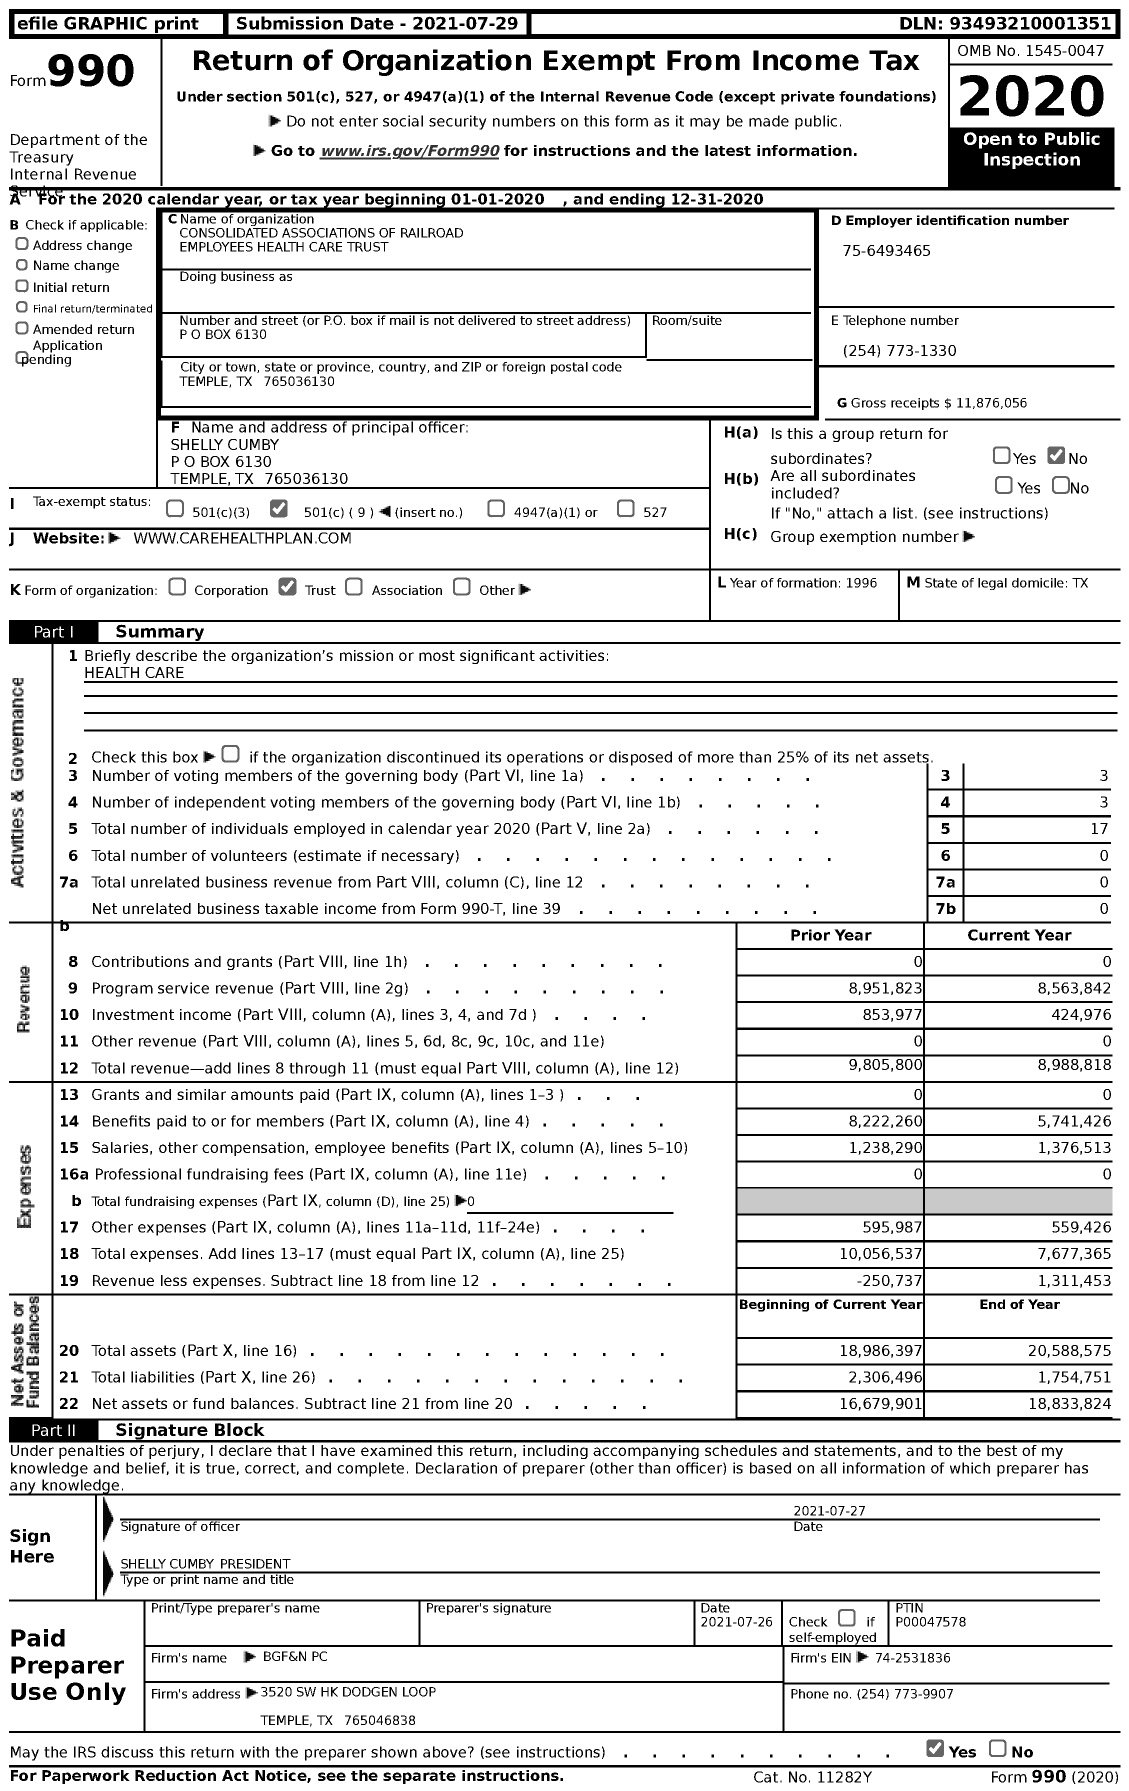 Image of first page of 2020 Form 990 for Consolidated Associations of Railroad Employees Health Care Trust